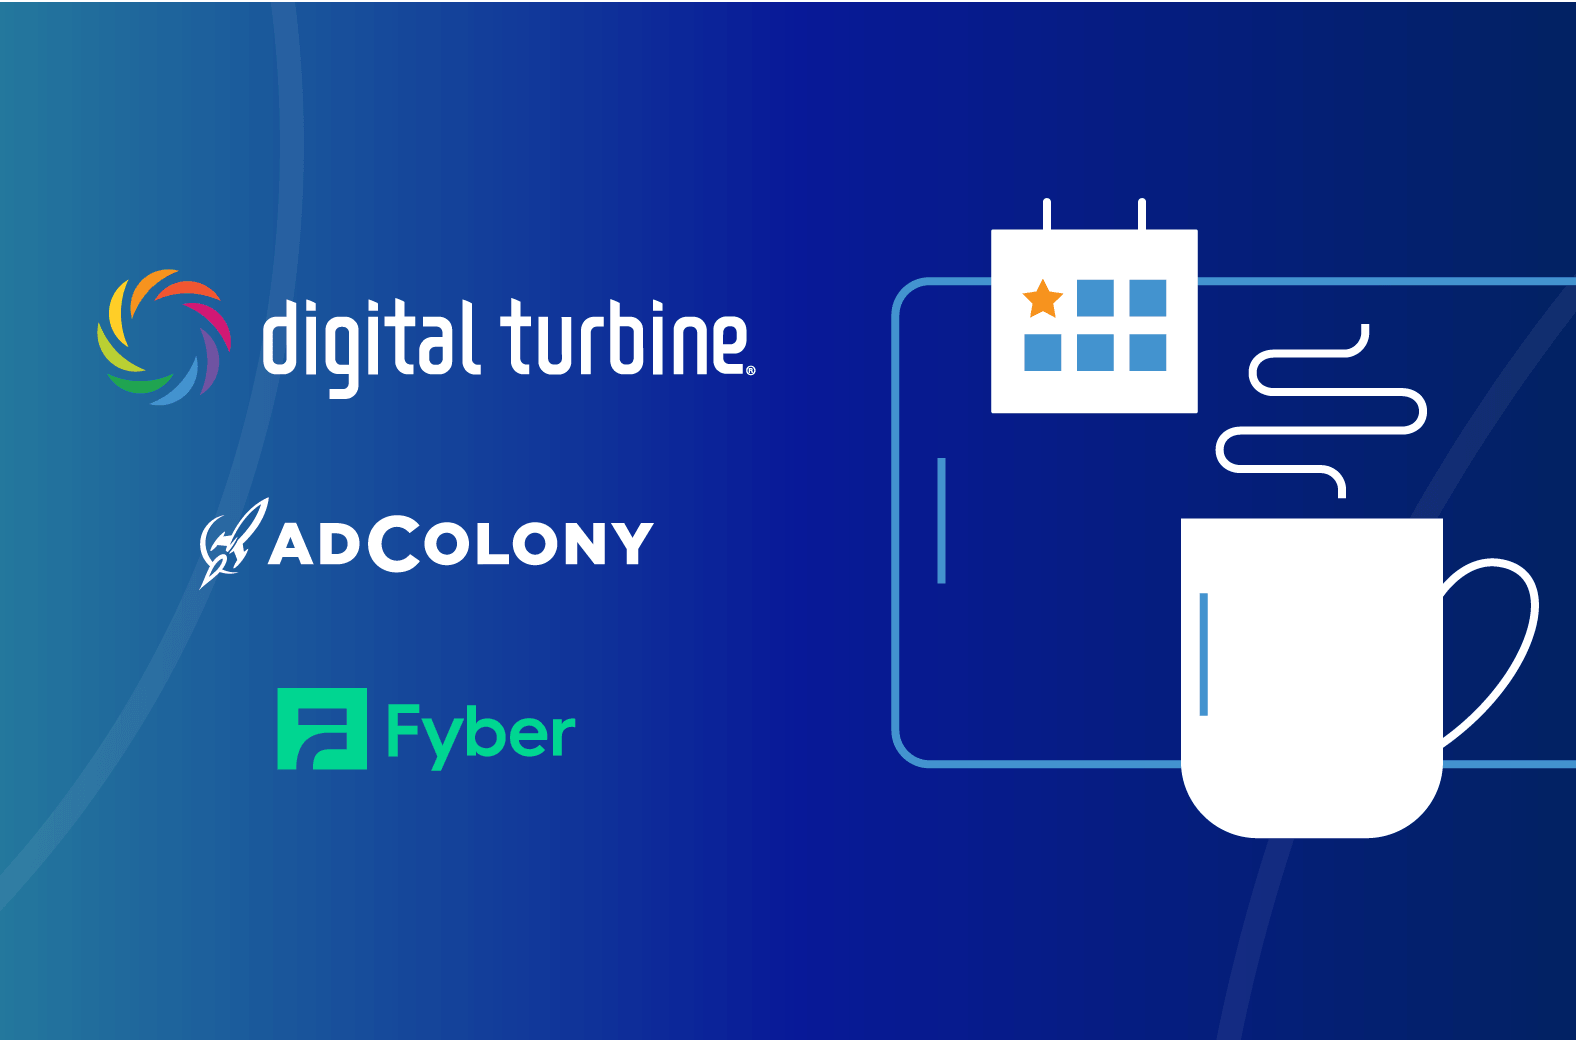 Mobile marketing experts Digital Turbine, AdColony and Fyber